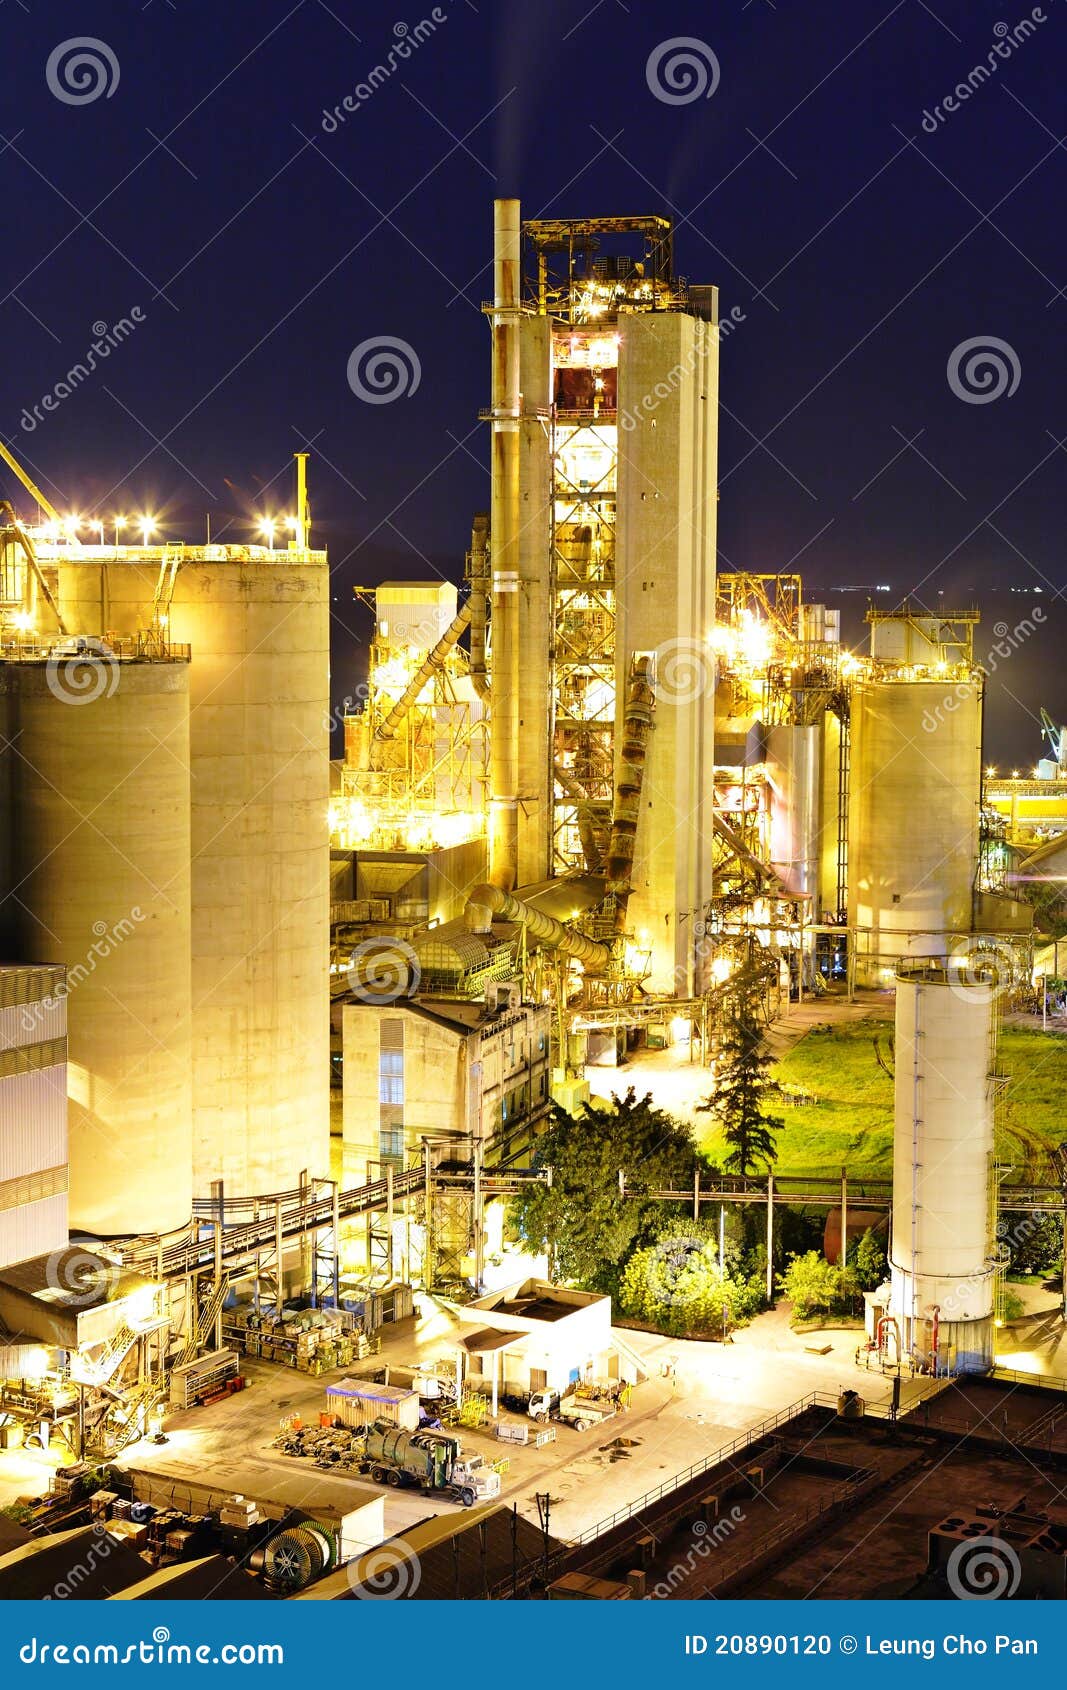 Cement factory stock photo. Image of dirty, pipes, machinery - 20890120